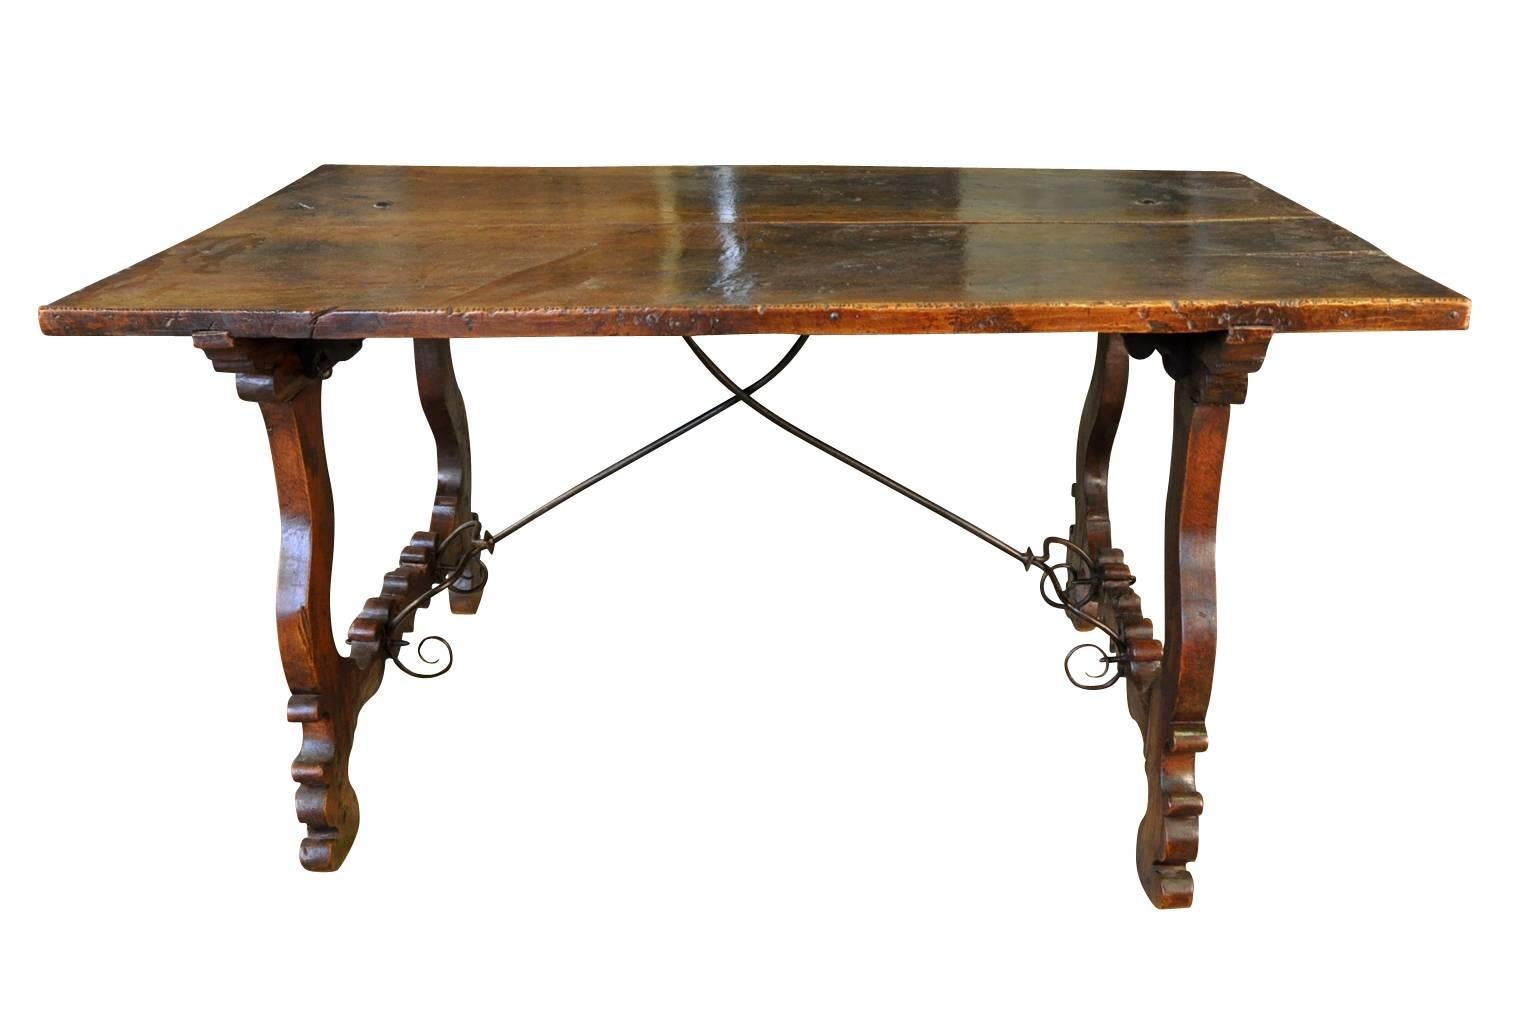 An outstanding 17th century Spanish table masterly constructed from walnut and hand-forged double pronged iron stretchers. Sensational patina, so very rich and luminous. Perfect as a smaller dining table or writing table.